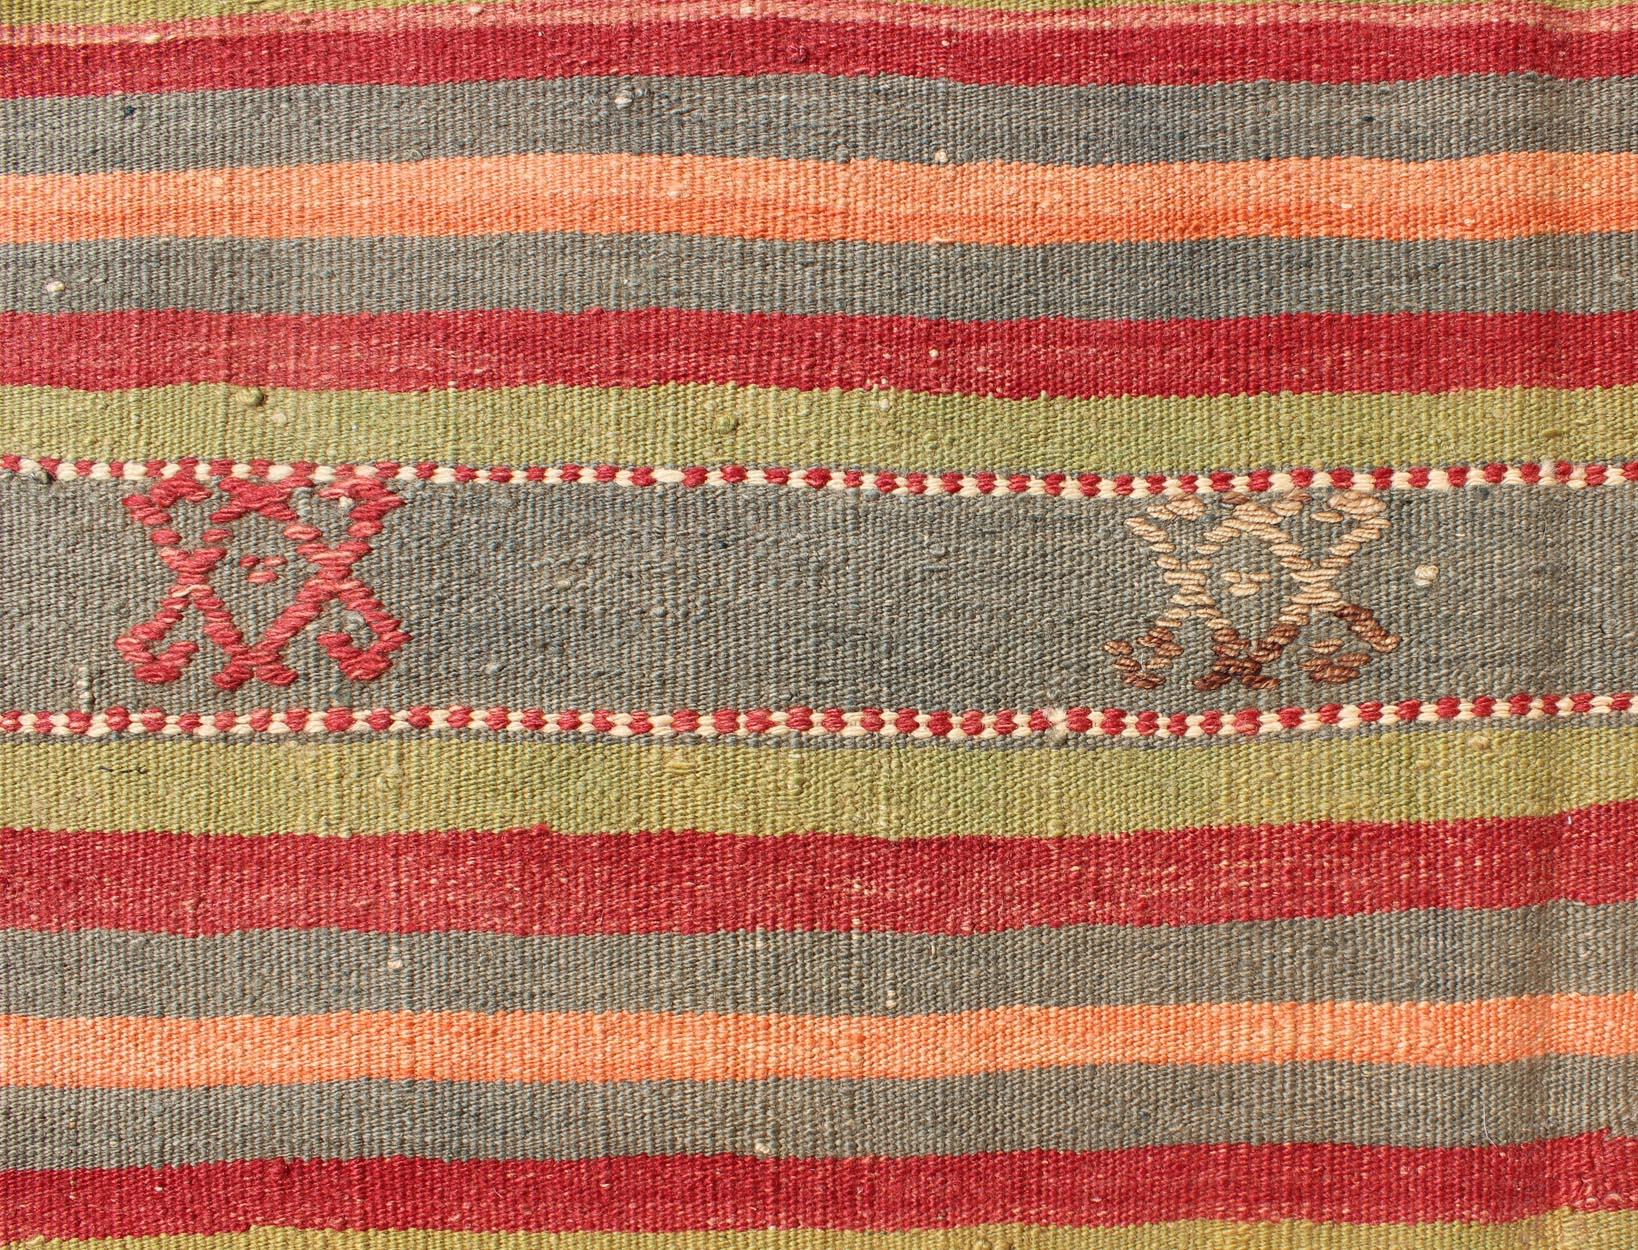 Vintage Turkish Kilim Rug with Geometric Shapes and Colorful Stripes For Sale 1